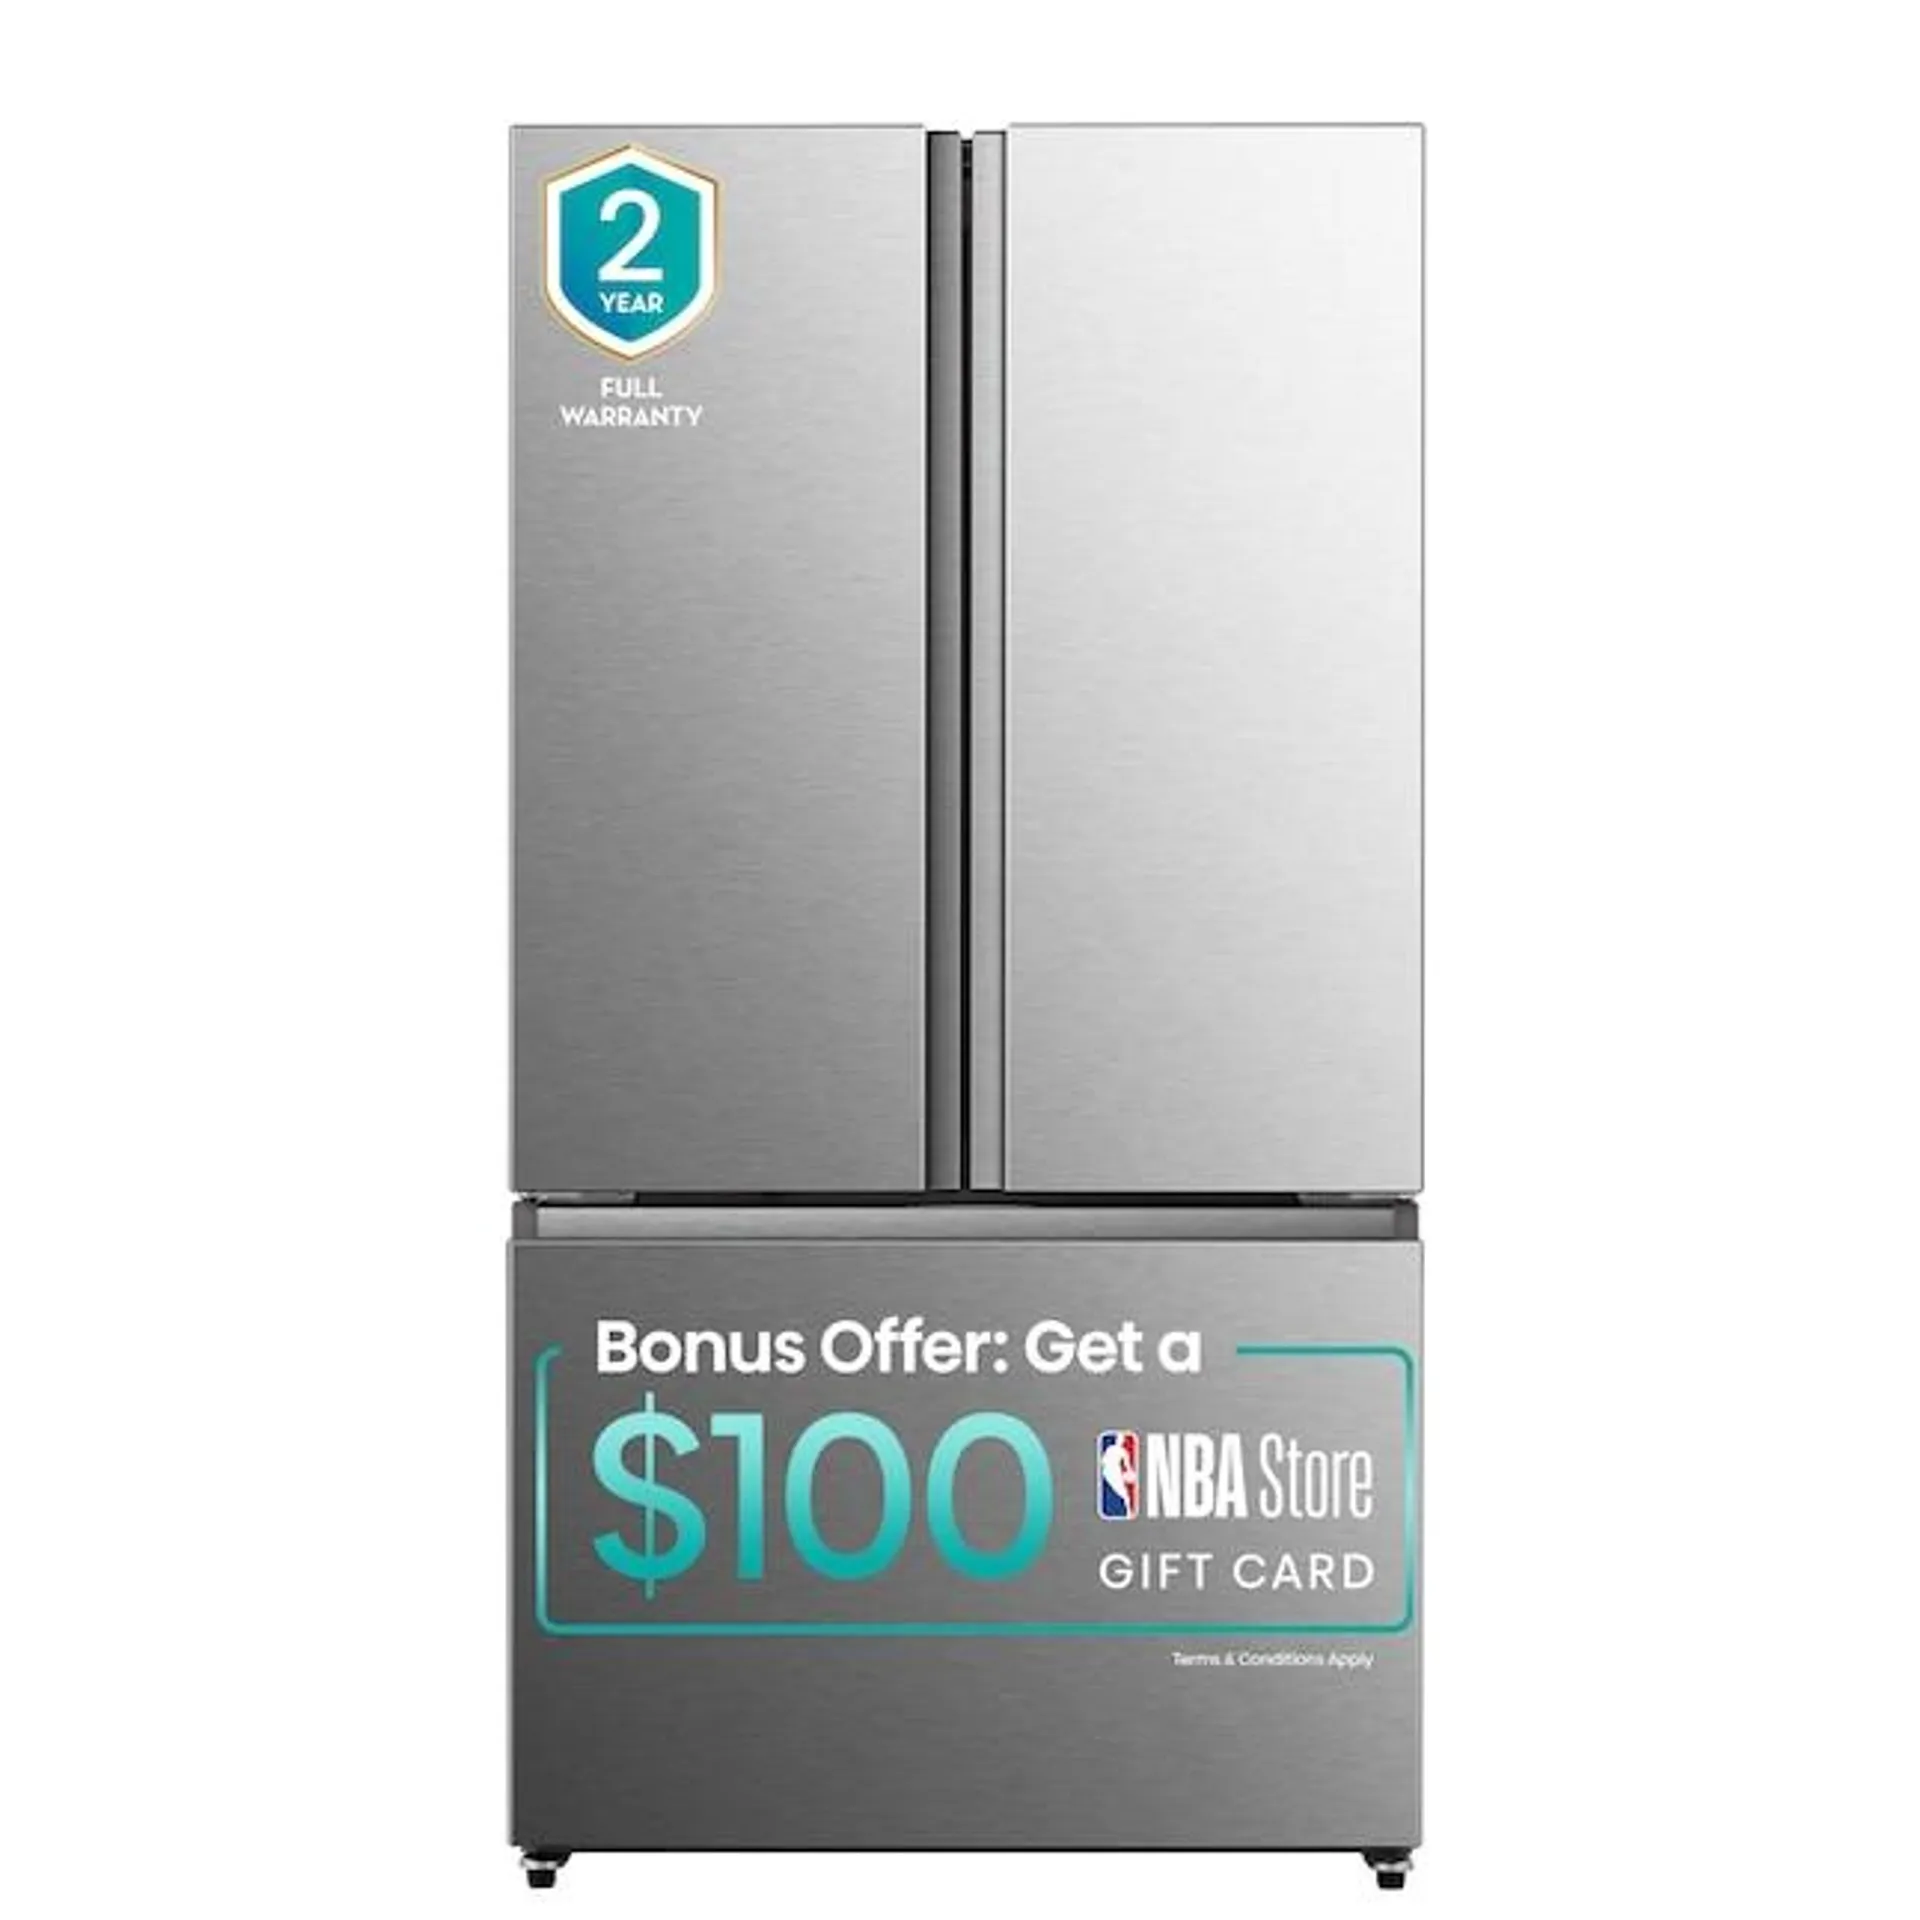 Hisense PureFlat 26.6-cu ft French Door Refrigerator with Ice Maker and Water dispenser (Fingerprint Resistant Stainless Steel) ENERGY STAR